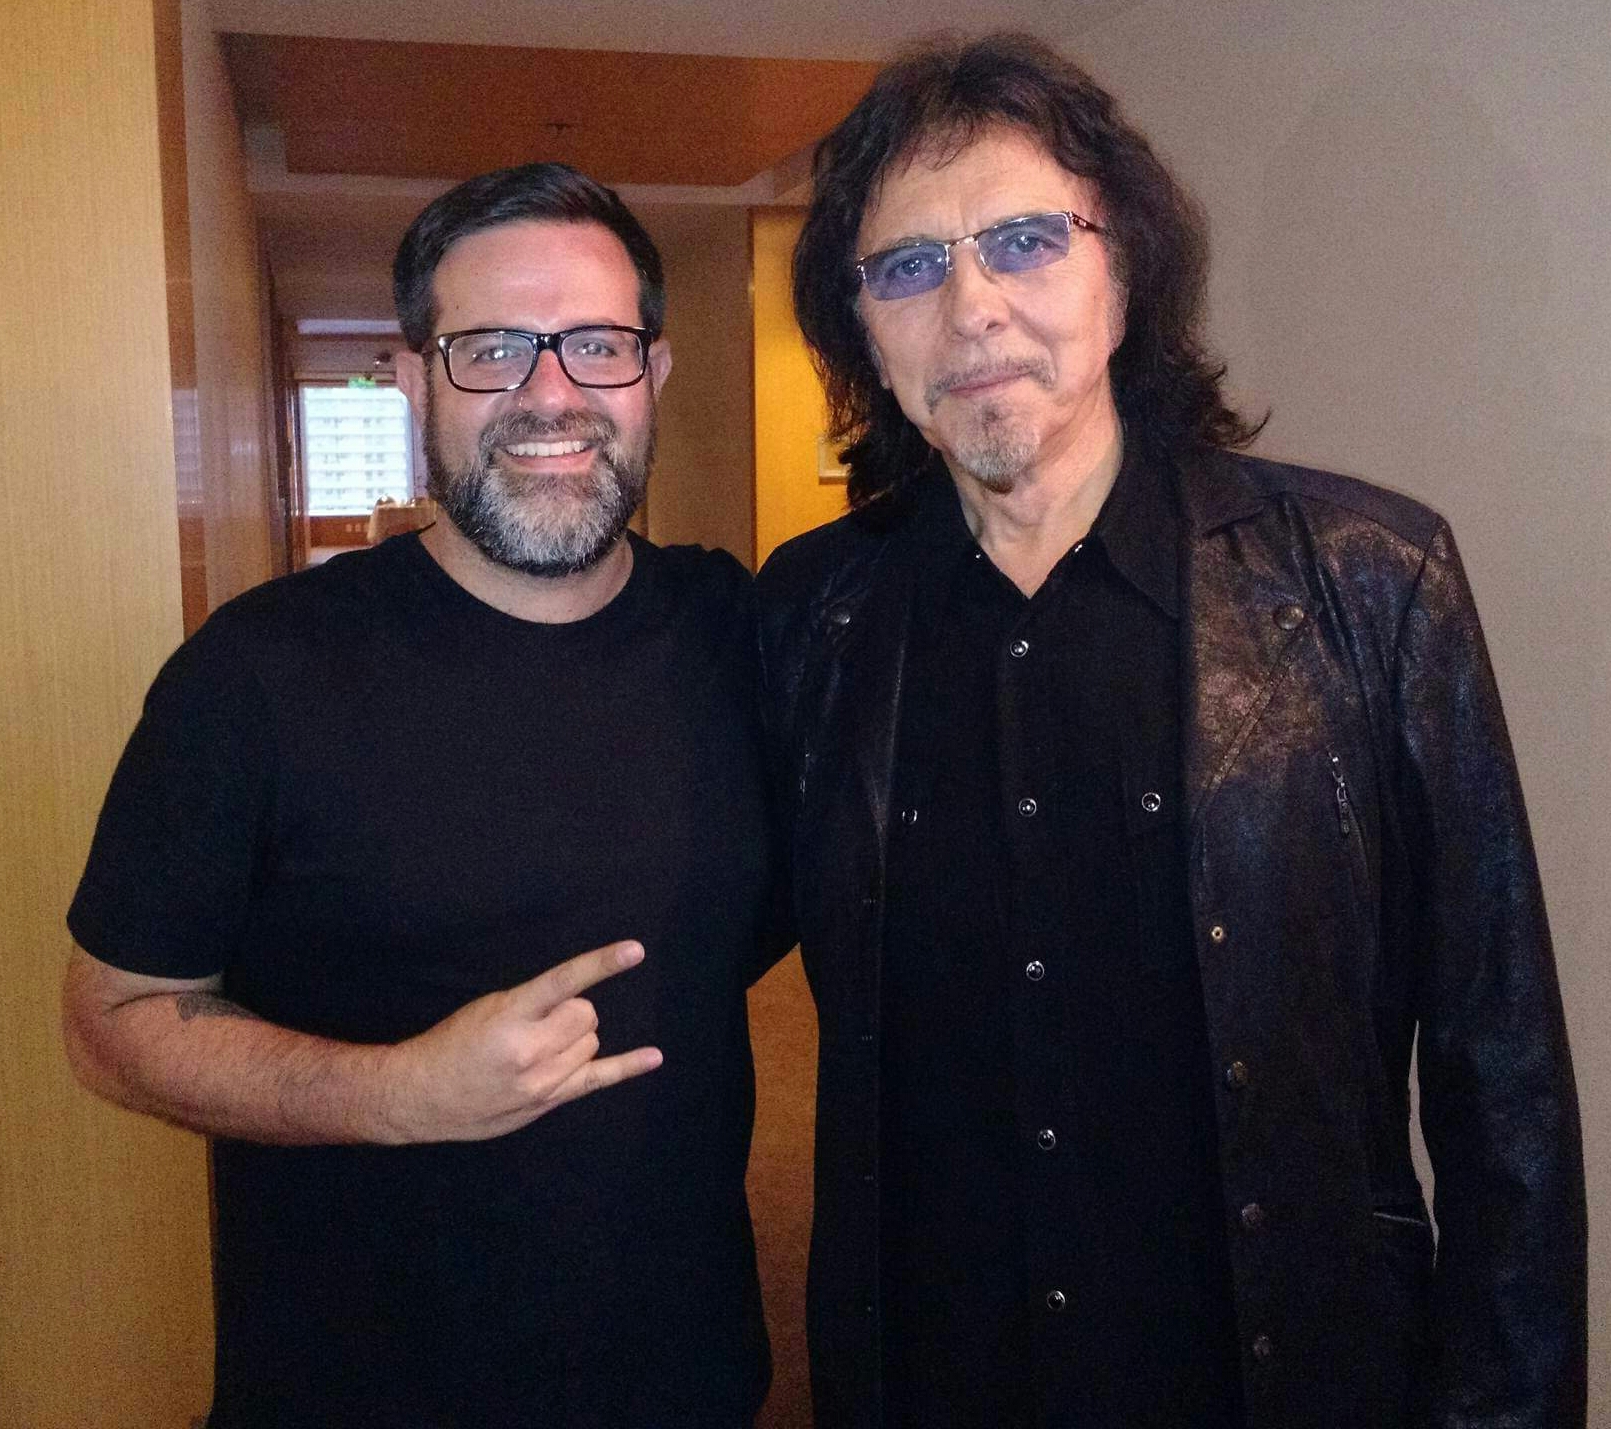 Tony with the leader of Brazilian fanclub Hernan Czauski, during The End tour, December 2016, Brazil.